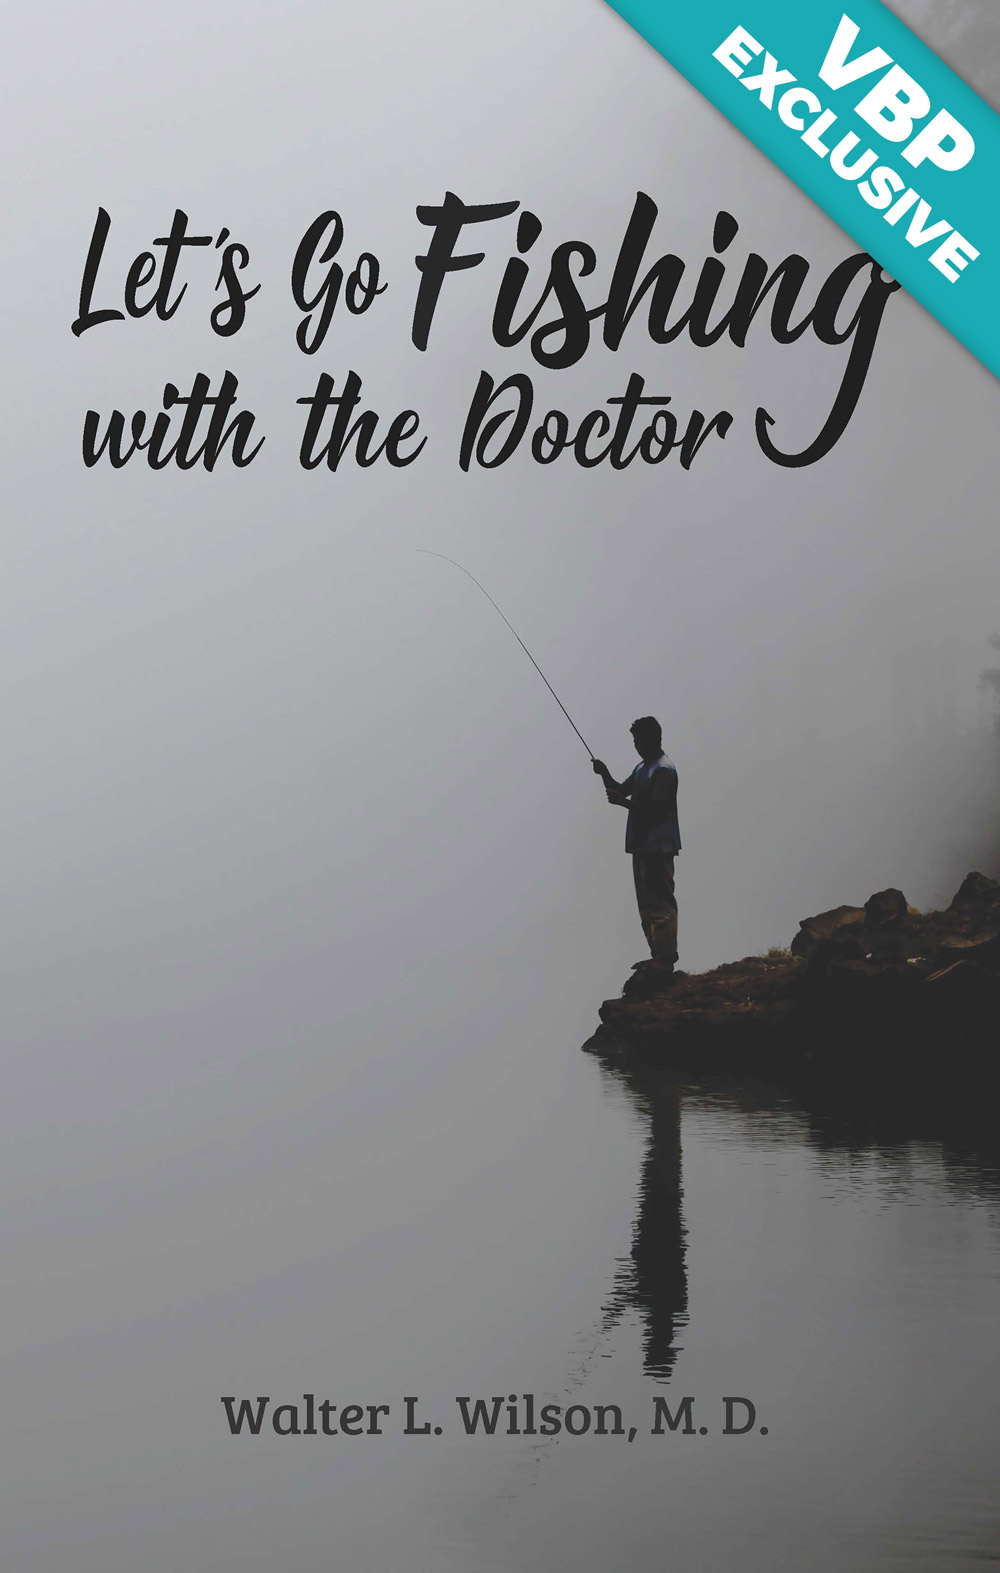 Let's Go Fishing with the Doctor